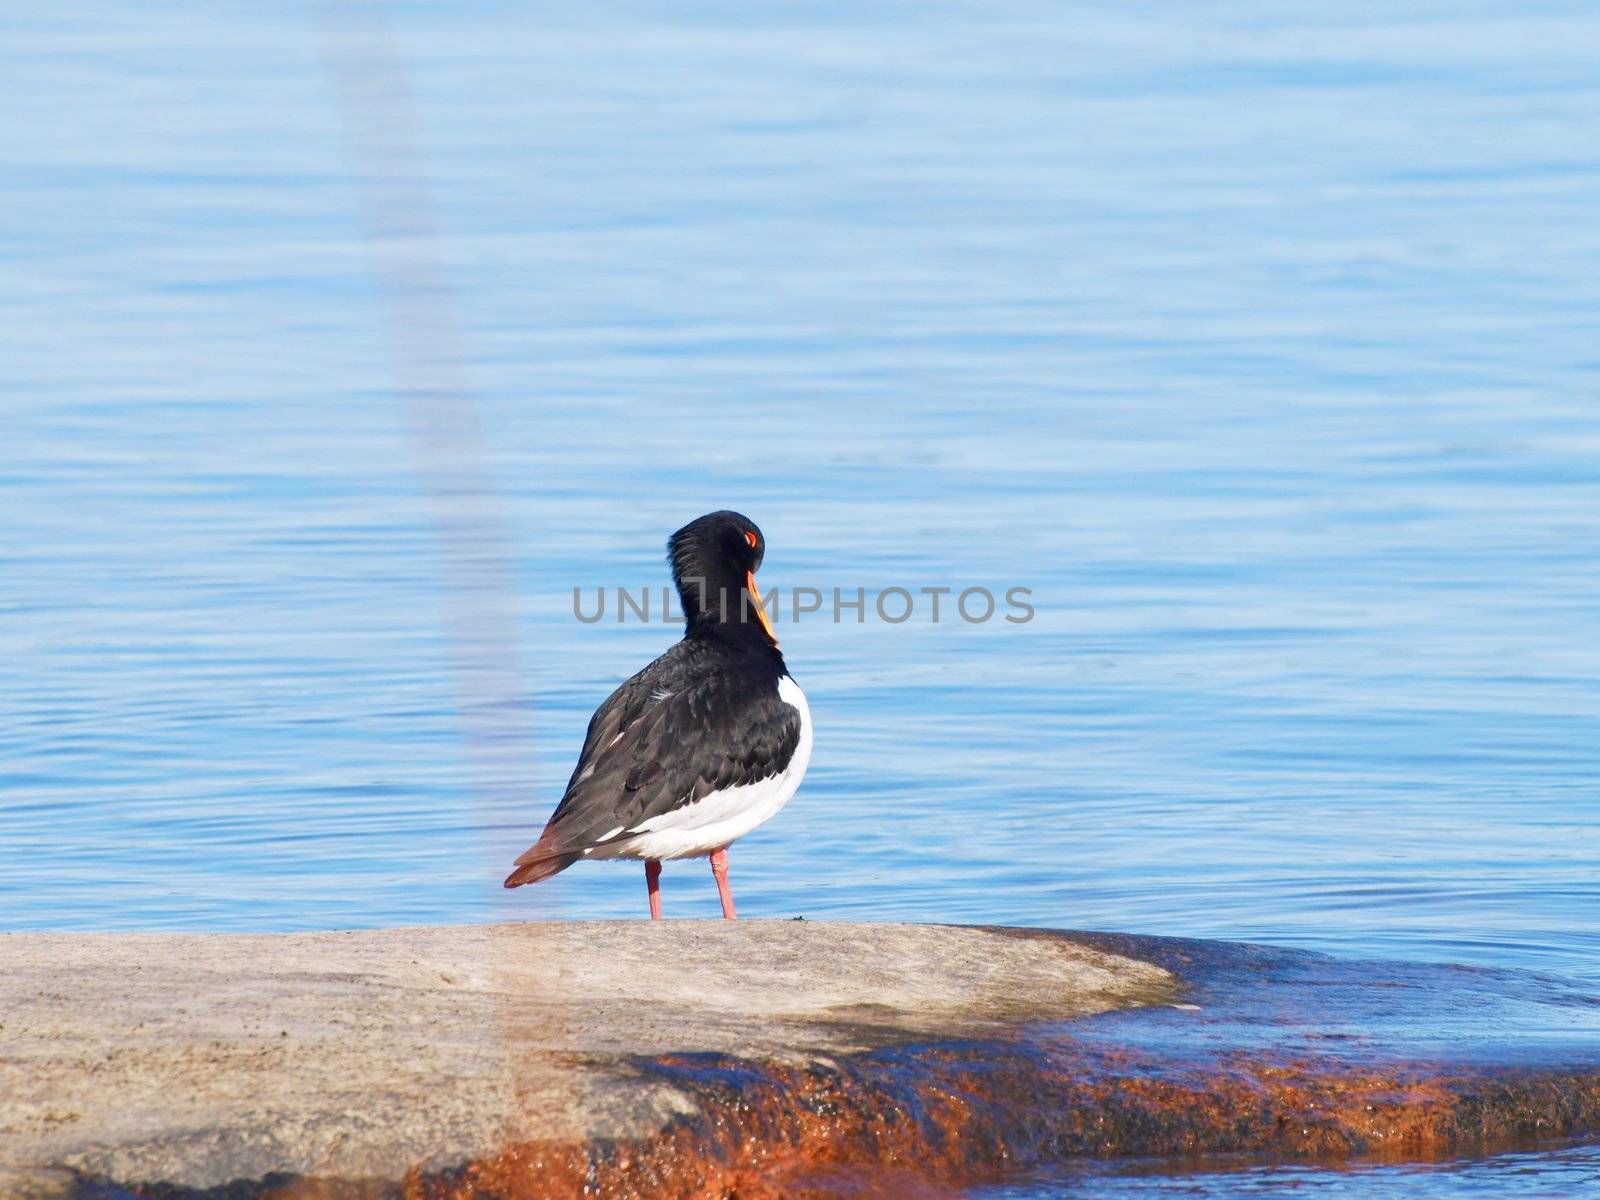 Oystercatcher, from the family Haematopodidae, on a mountain next to the blue sea in the background